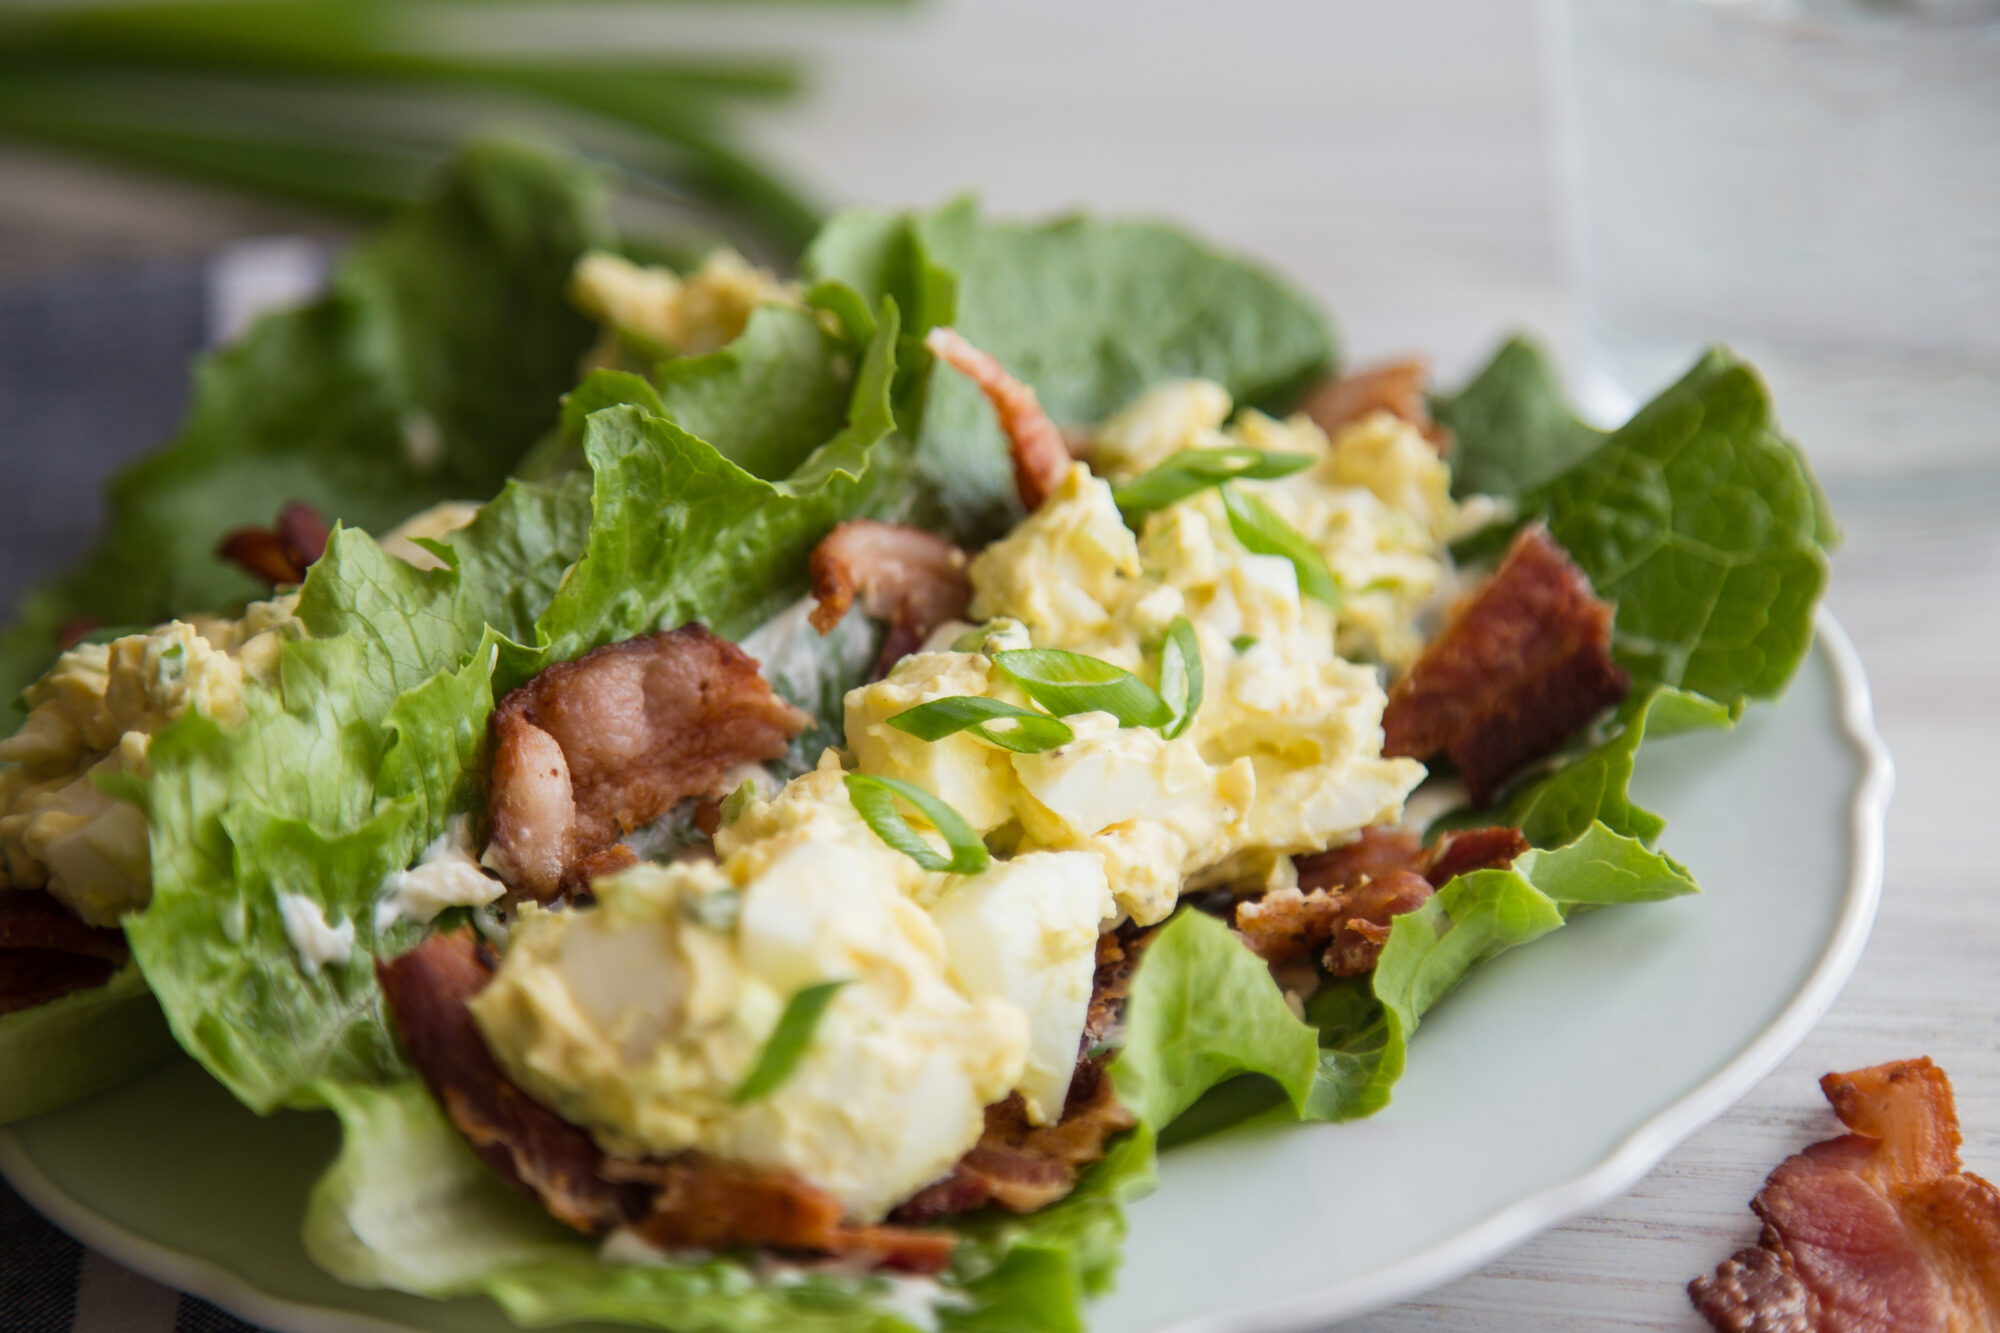 Close up of egg salad on top of bacon slices, lying on a lettuce leaf